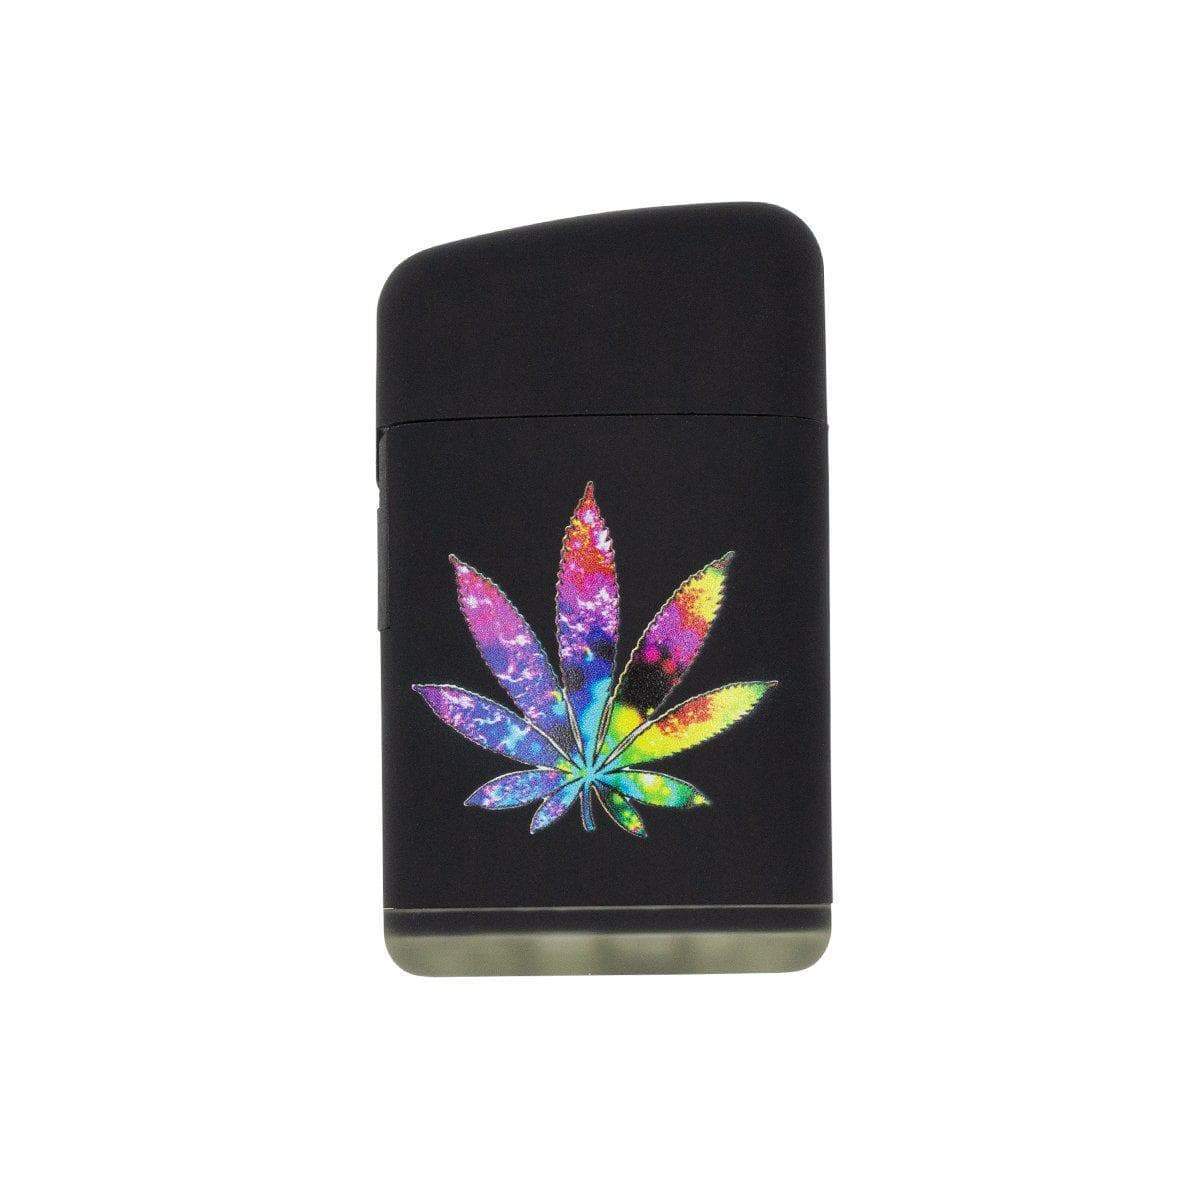 Compact flip top mini torch lighter smoking device accessory with a classy design in Fractal colors